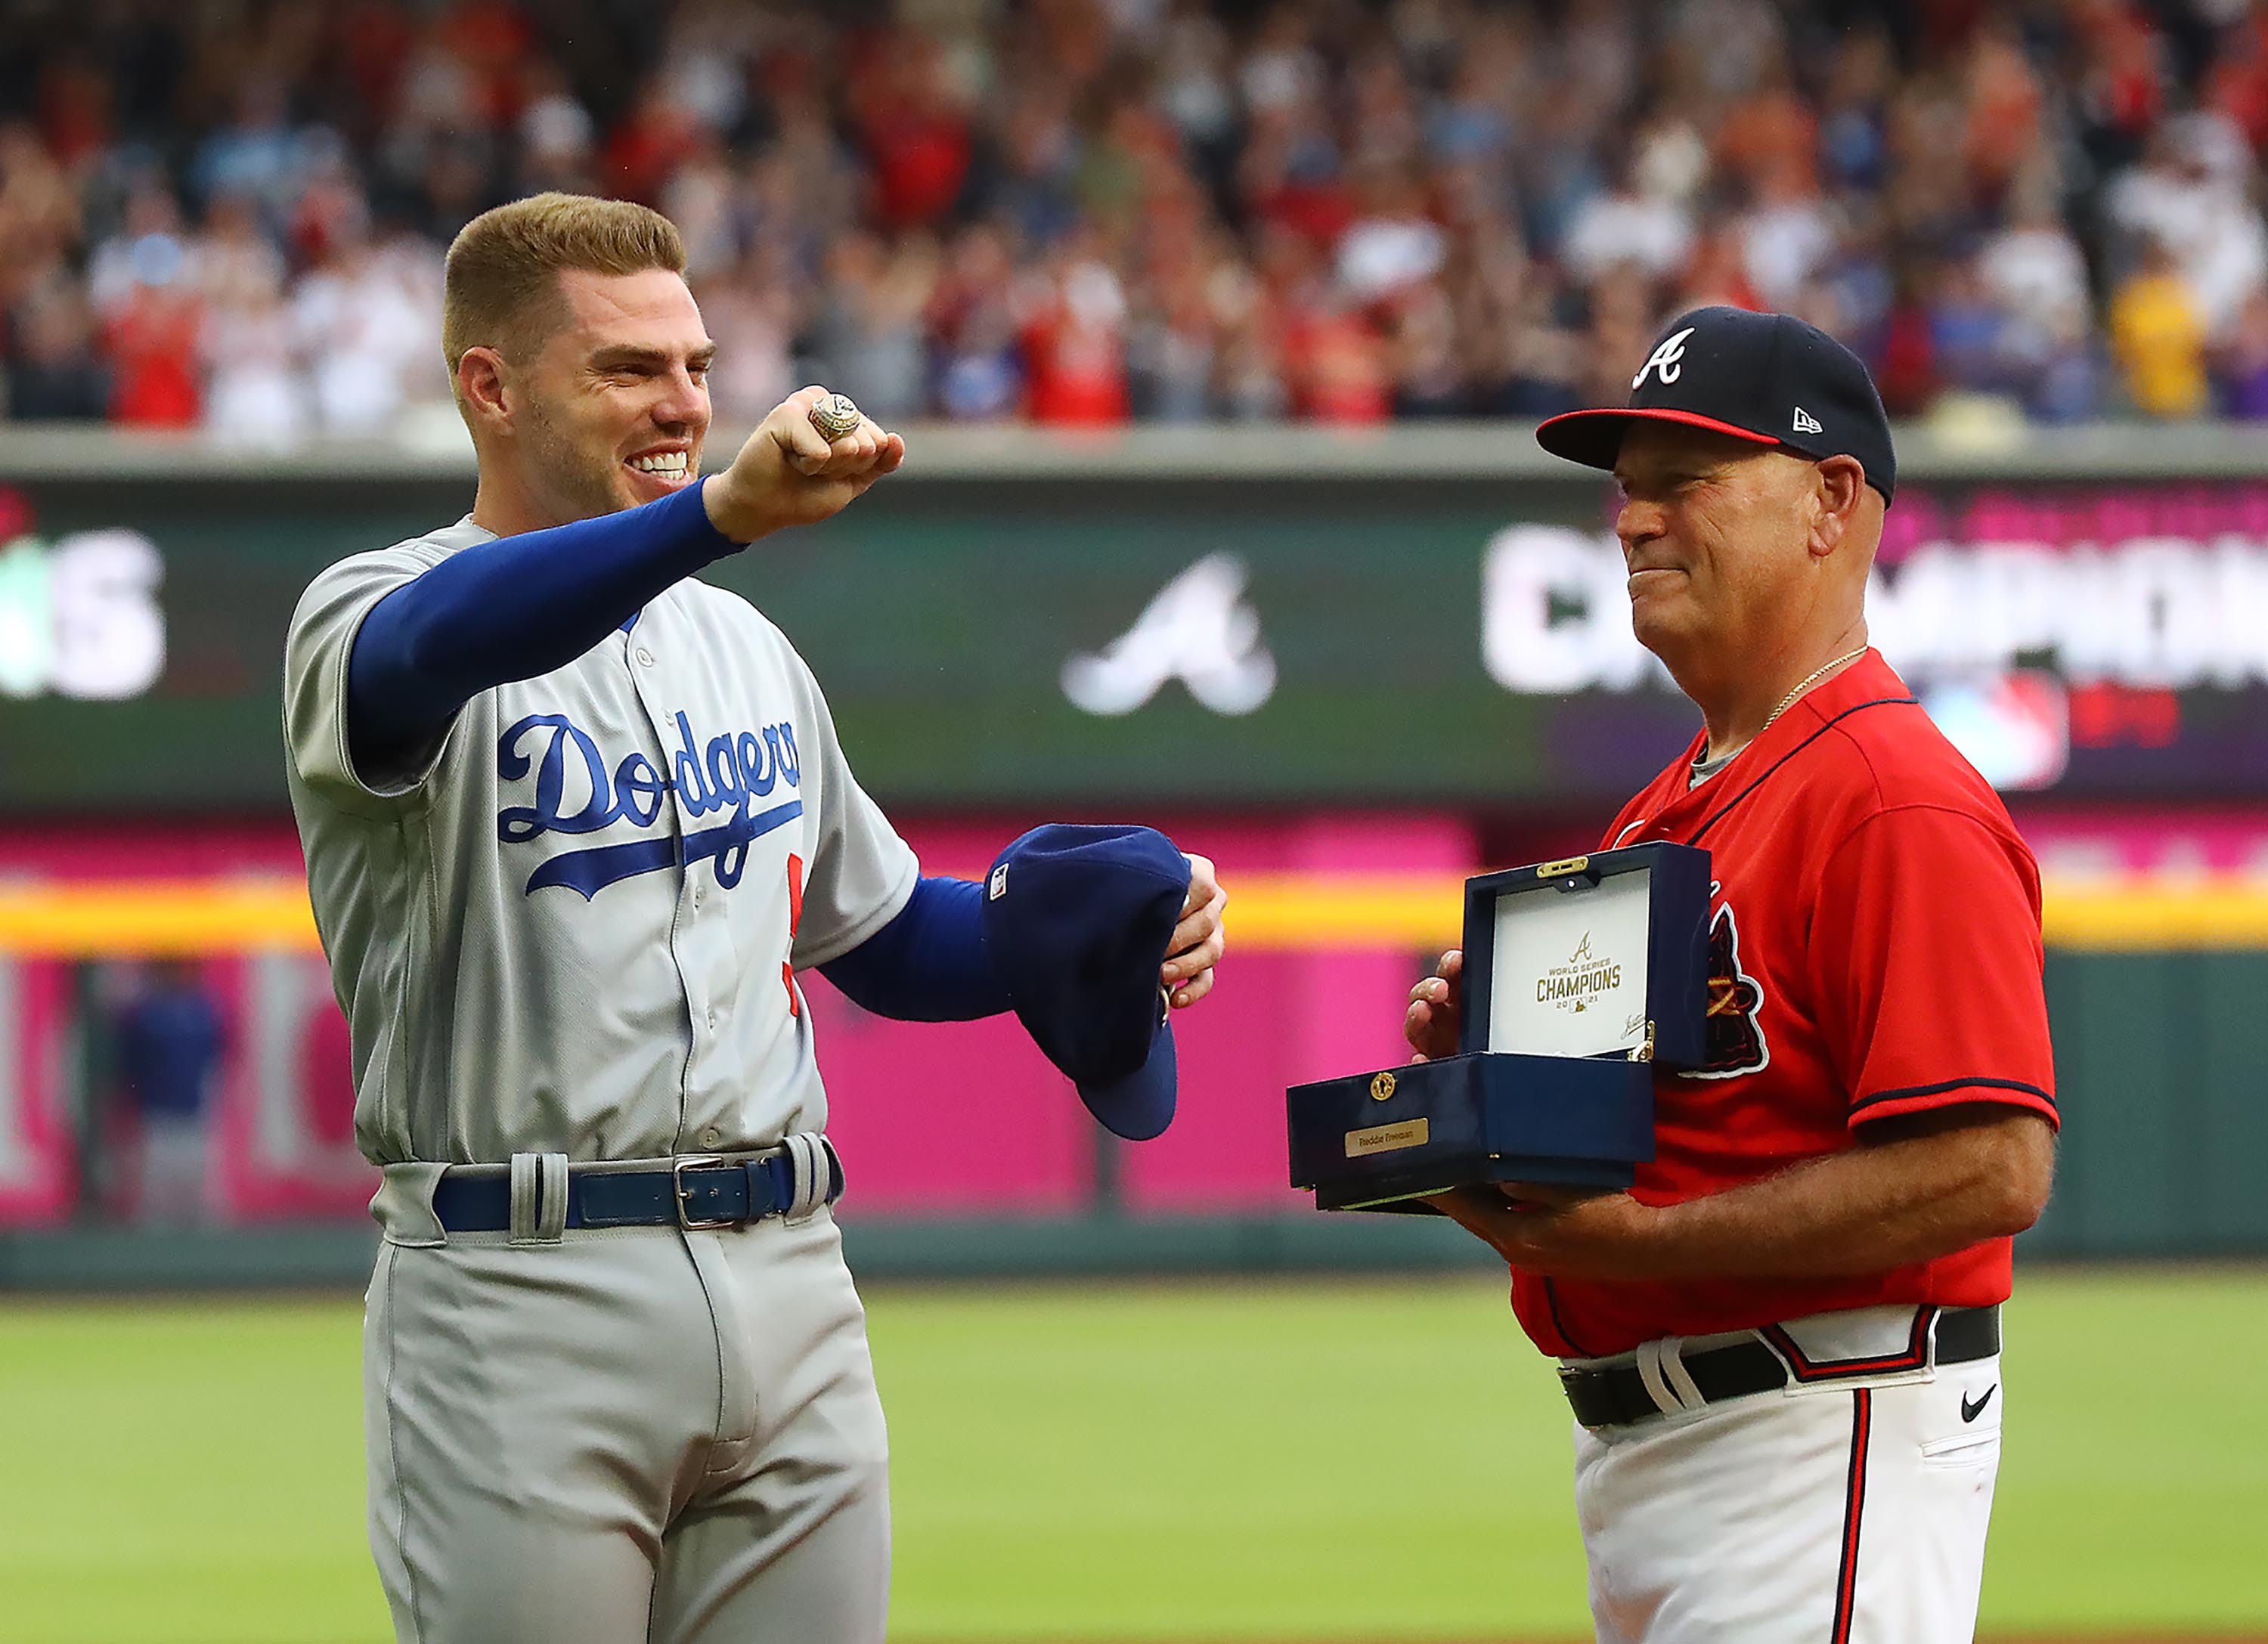 Mark Bradley: The Braves are 3-4. They're fine with that